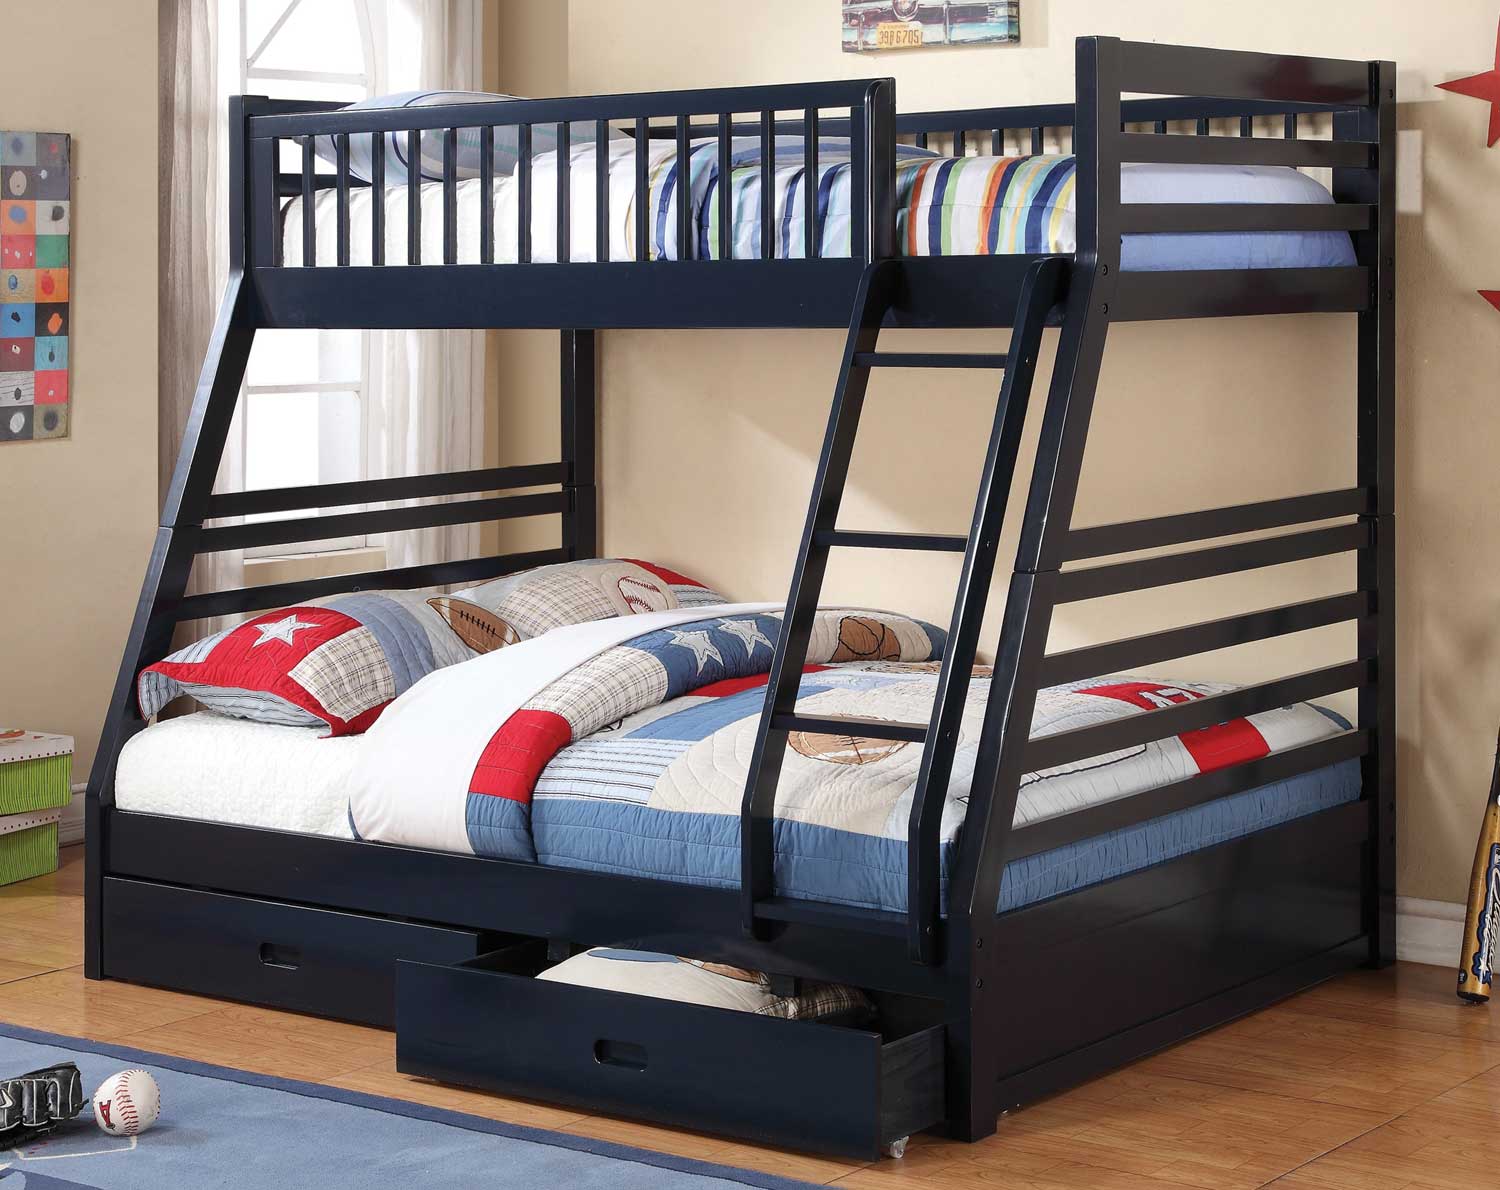 Coaster 460181 Twin-Full Bunk Bed - Navy Blue